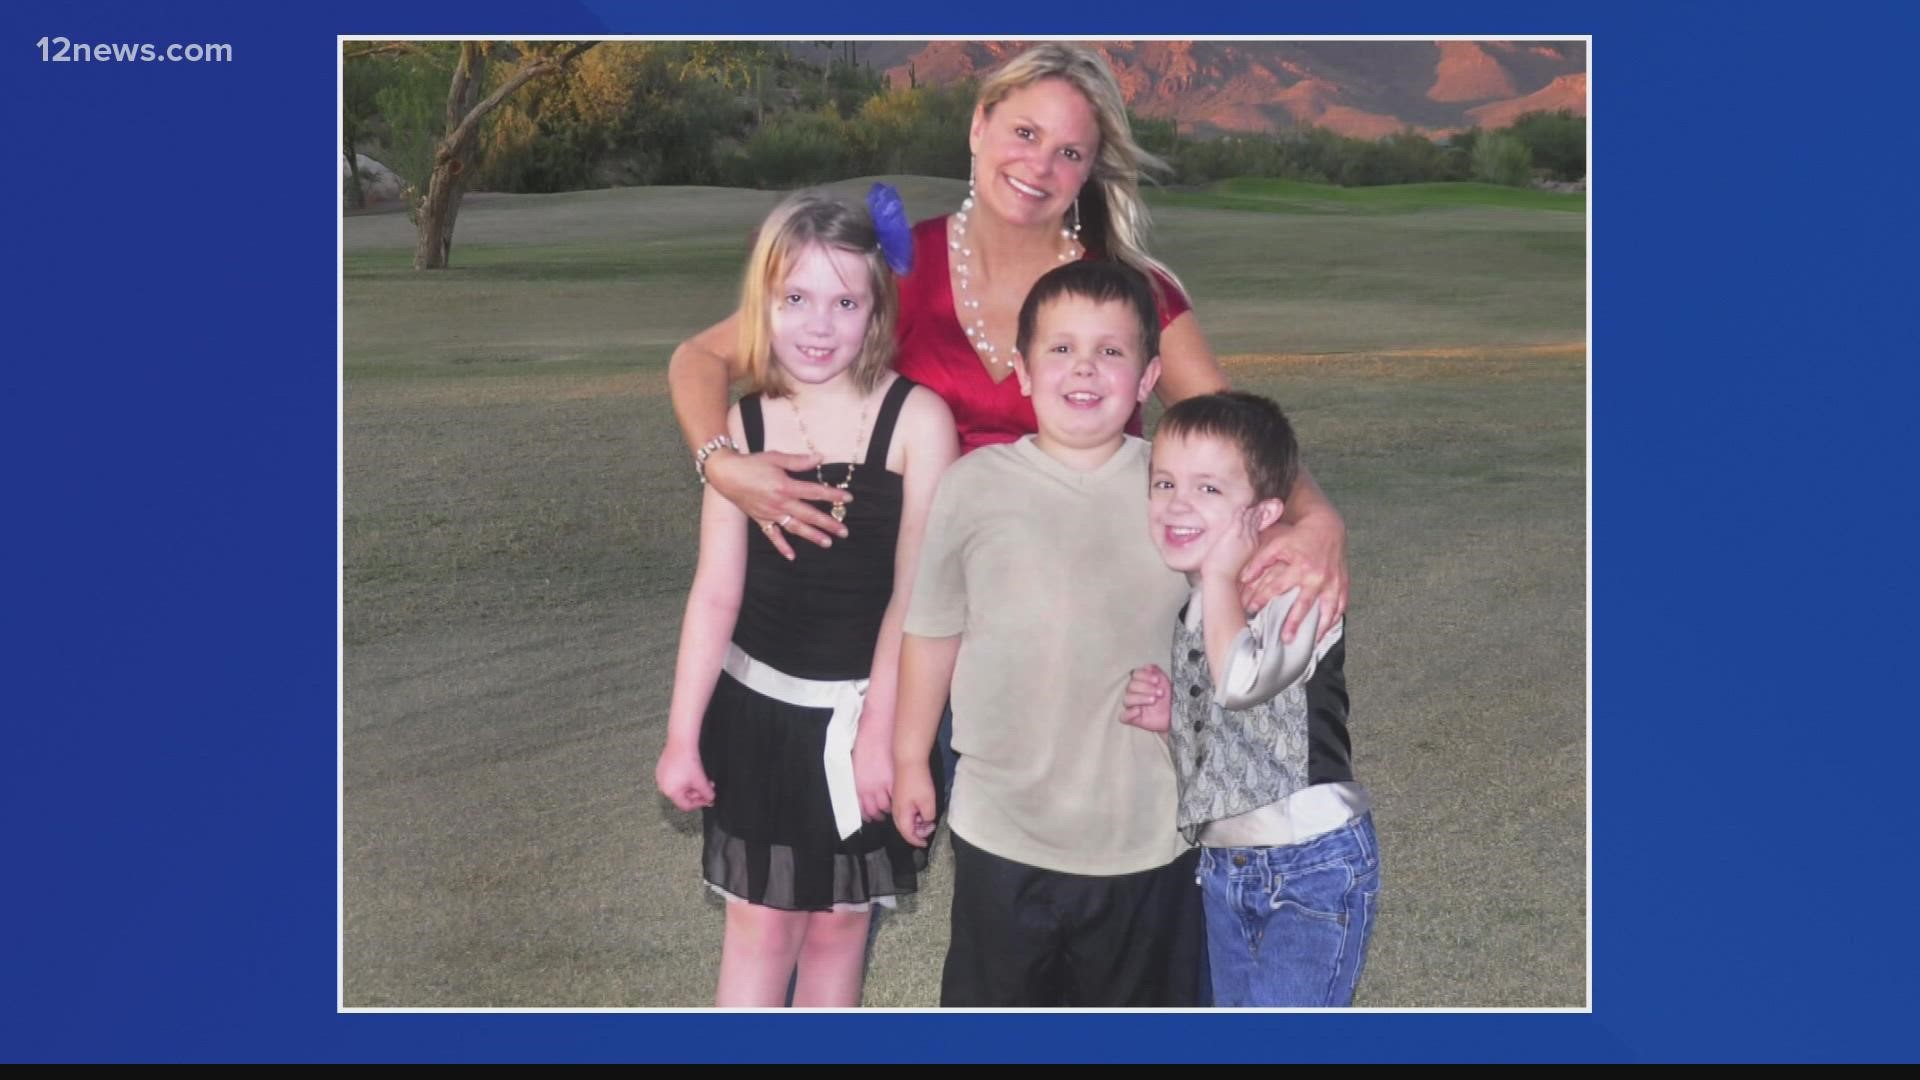 It's been nearly 10 years since Karen Perry lost her kids in a Thanksgiving Eve plane crash. She's keeping their memory alive helping other children.